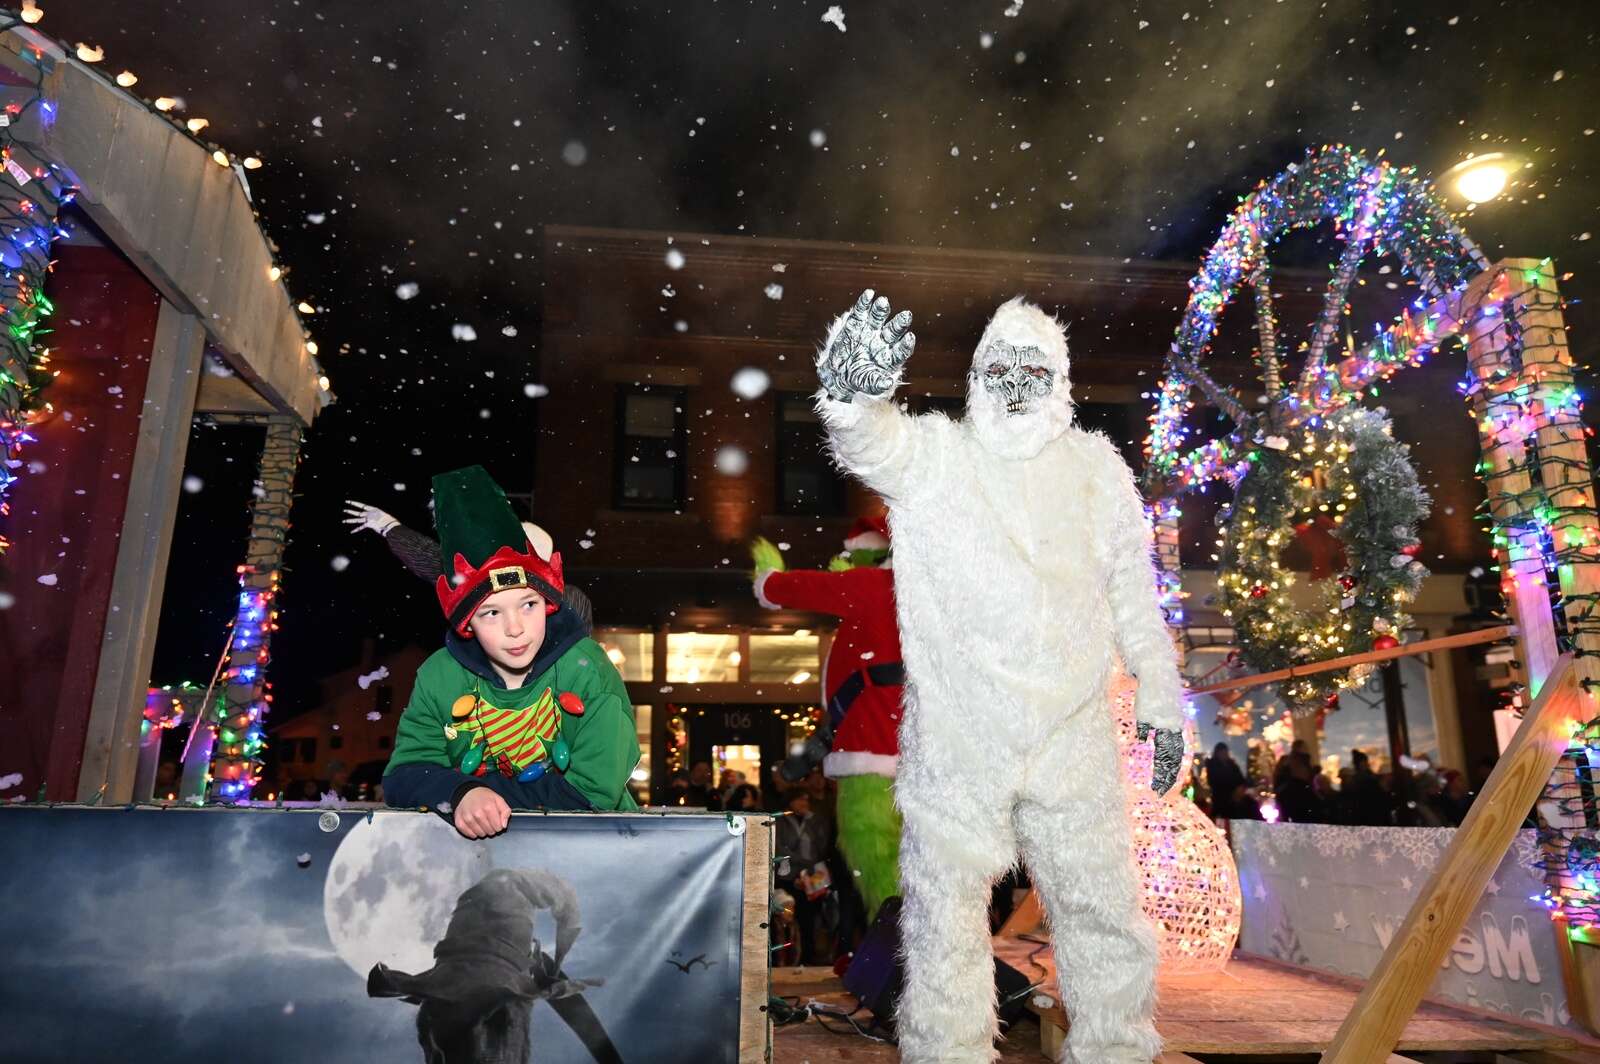 The abominable snowman waves from a float uring the Miracle on Main parade